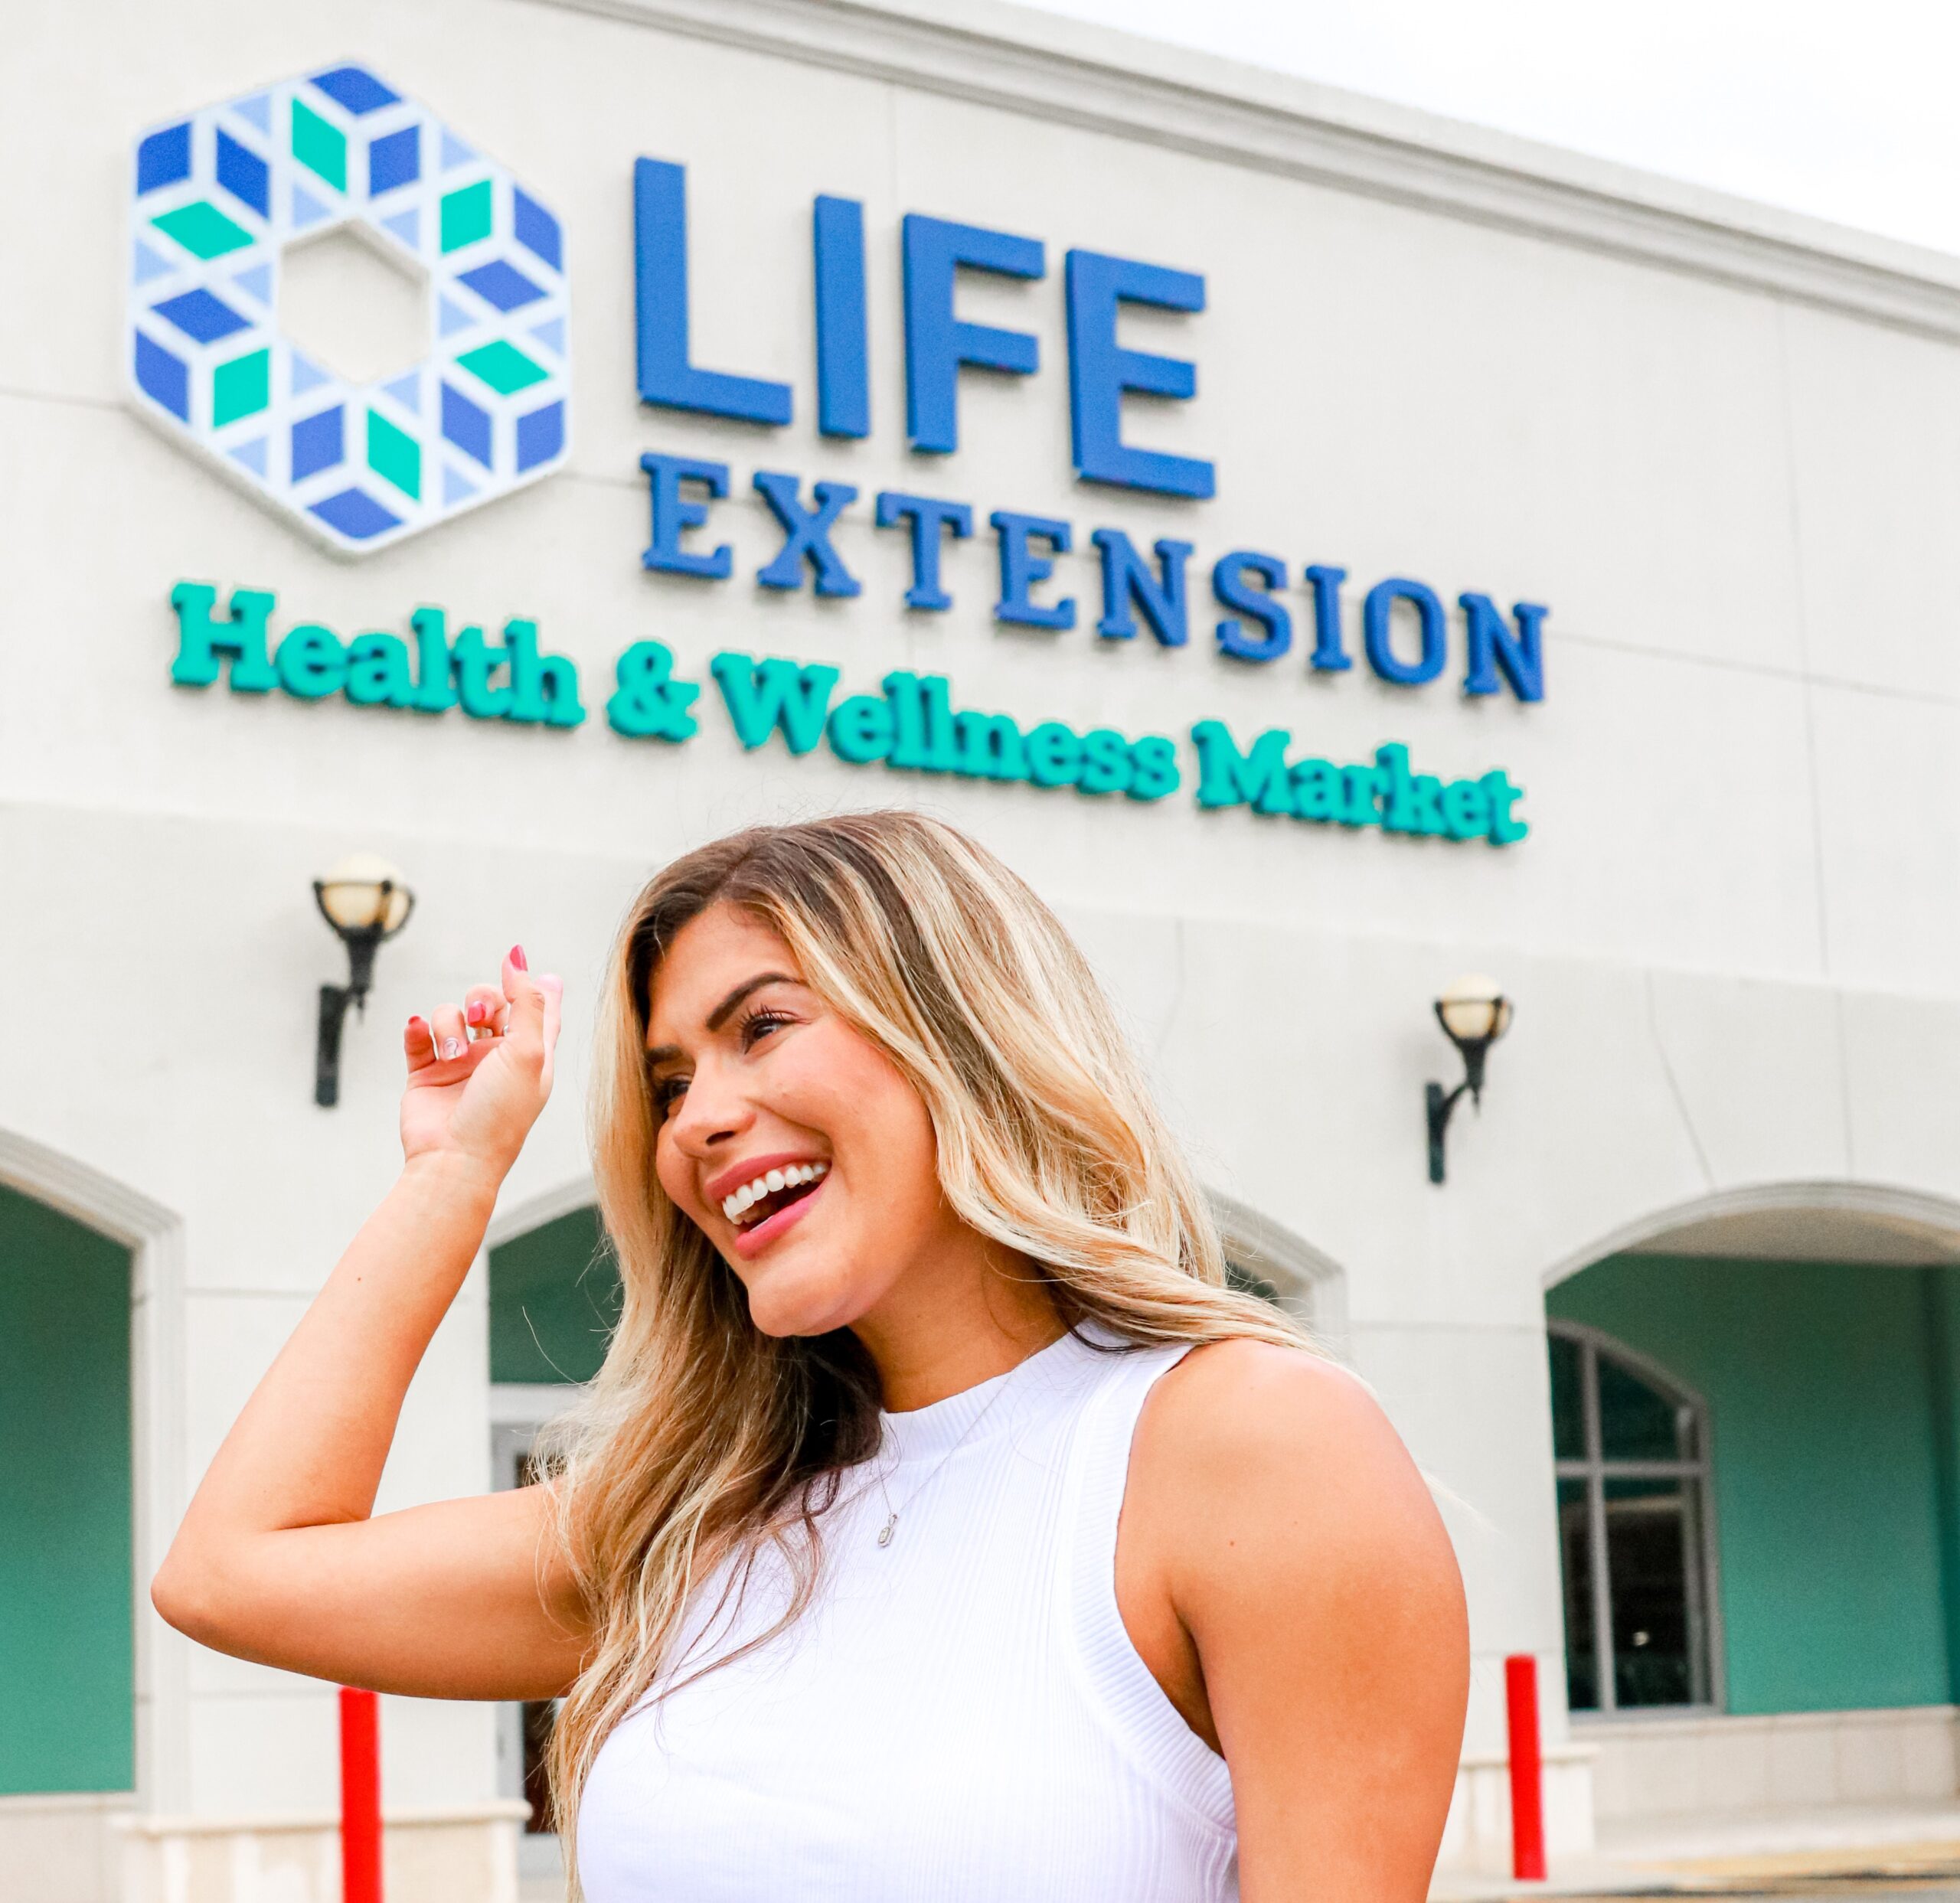 New Healthy Market in Fort Lauderdale: Life Extension Market